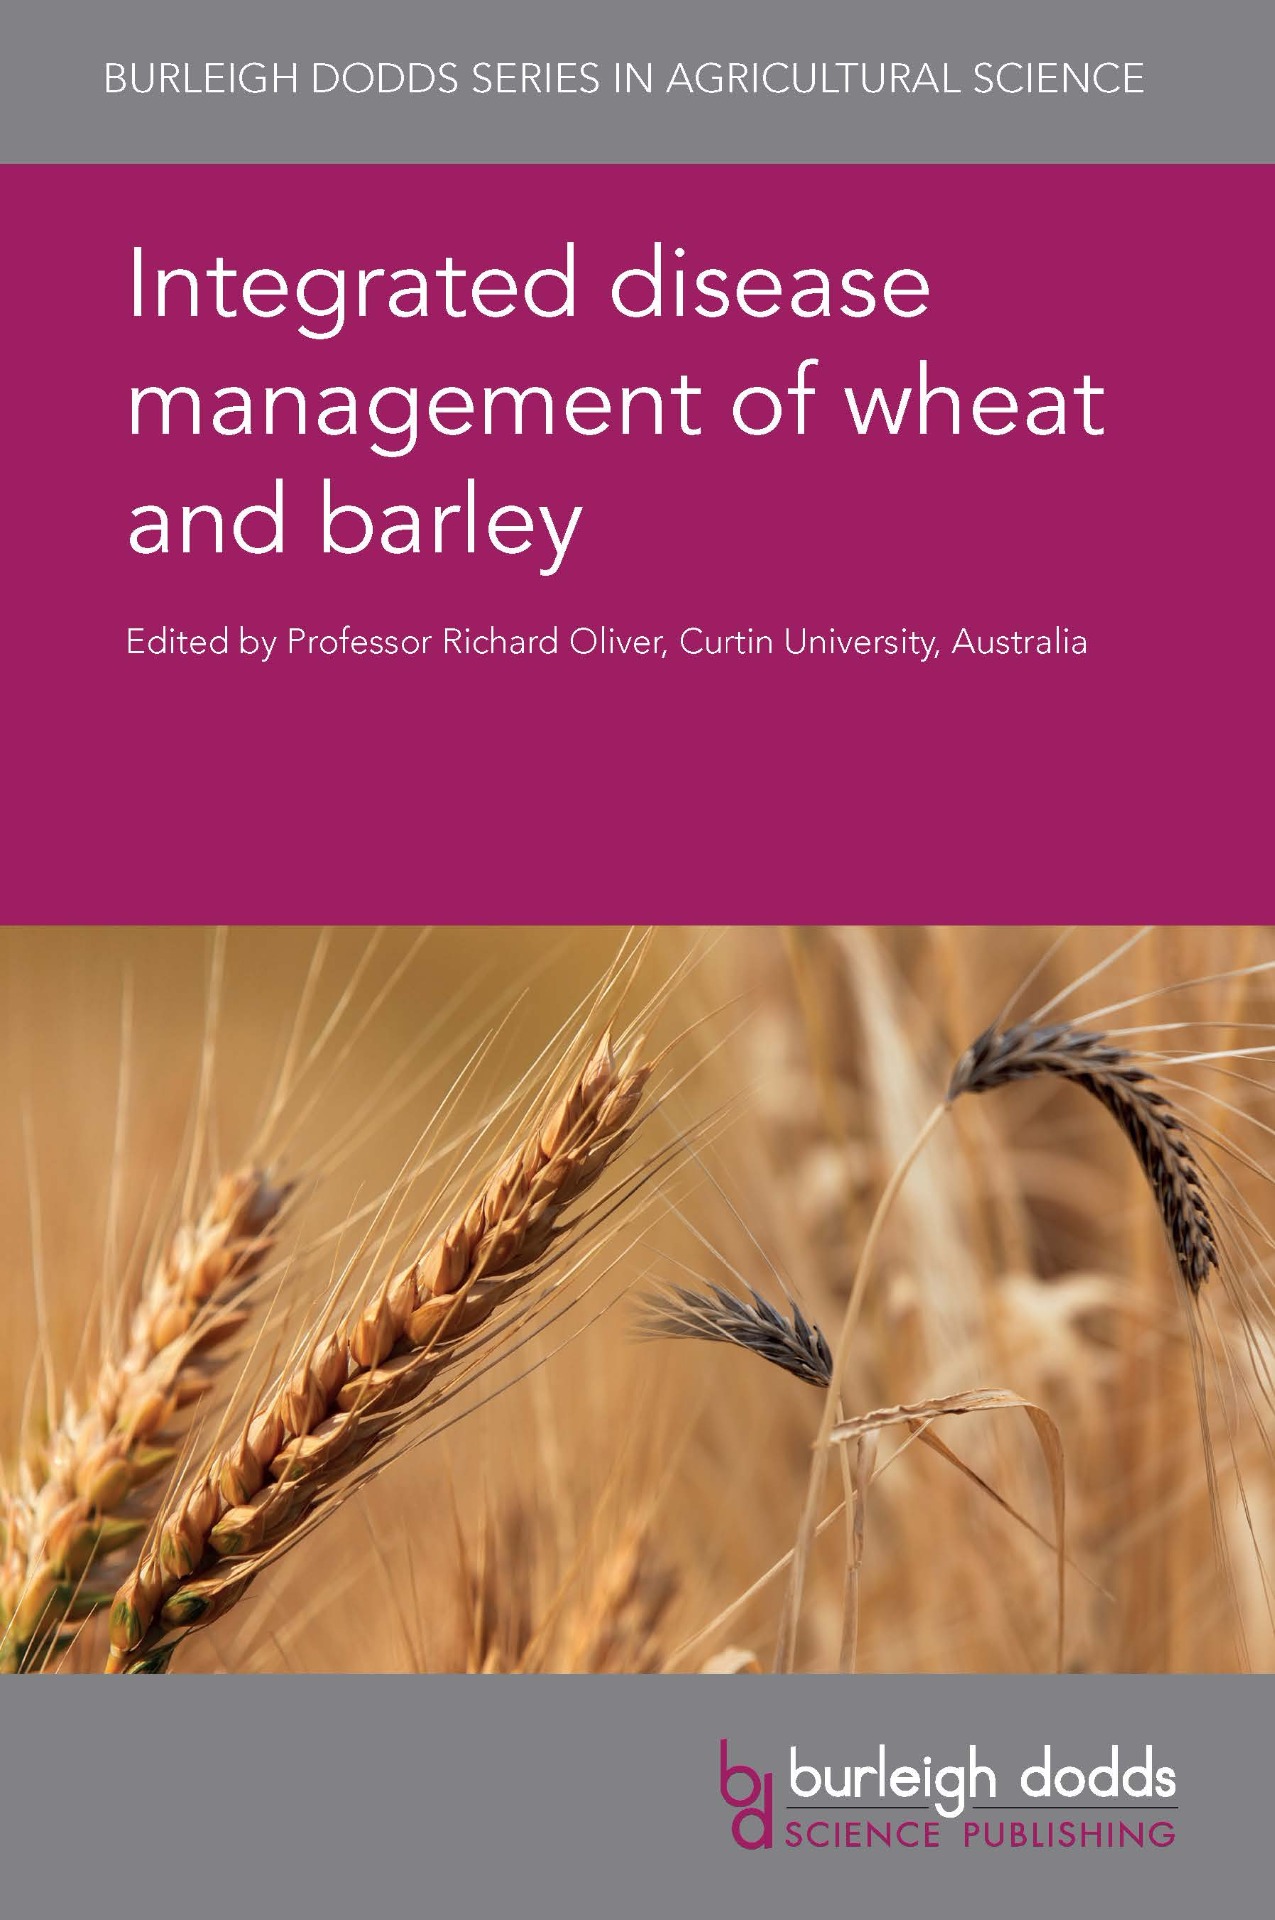 Integrated disease management of wheat and barley